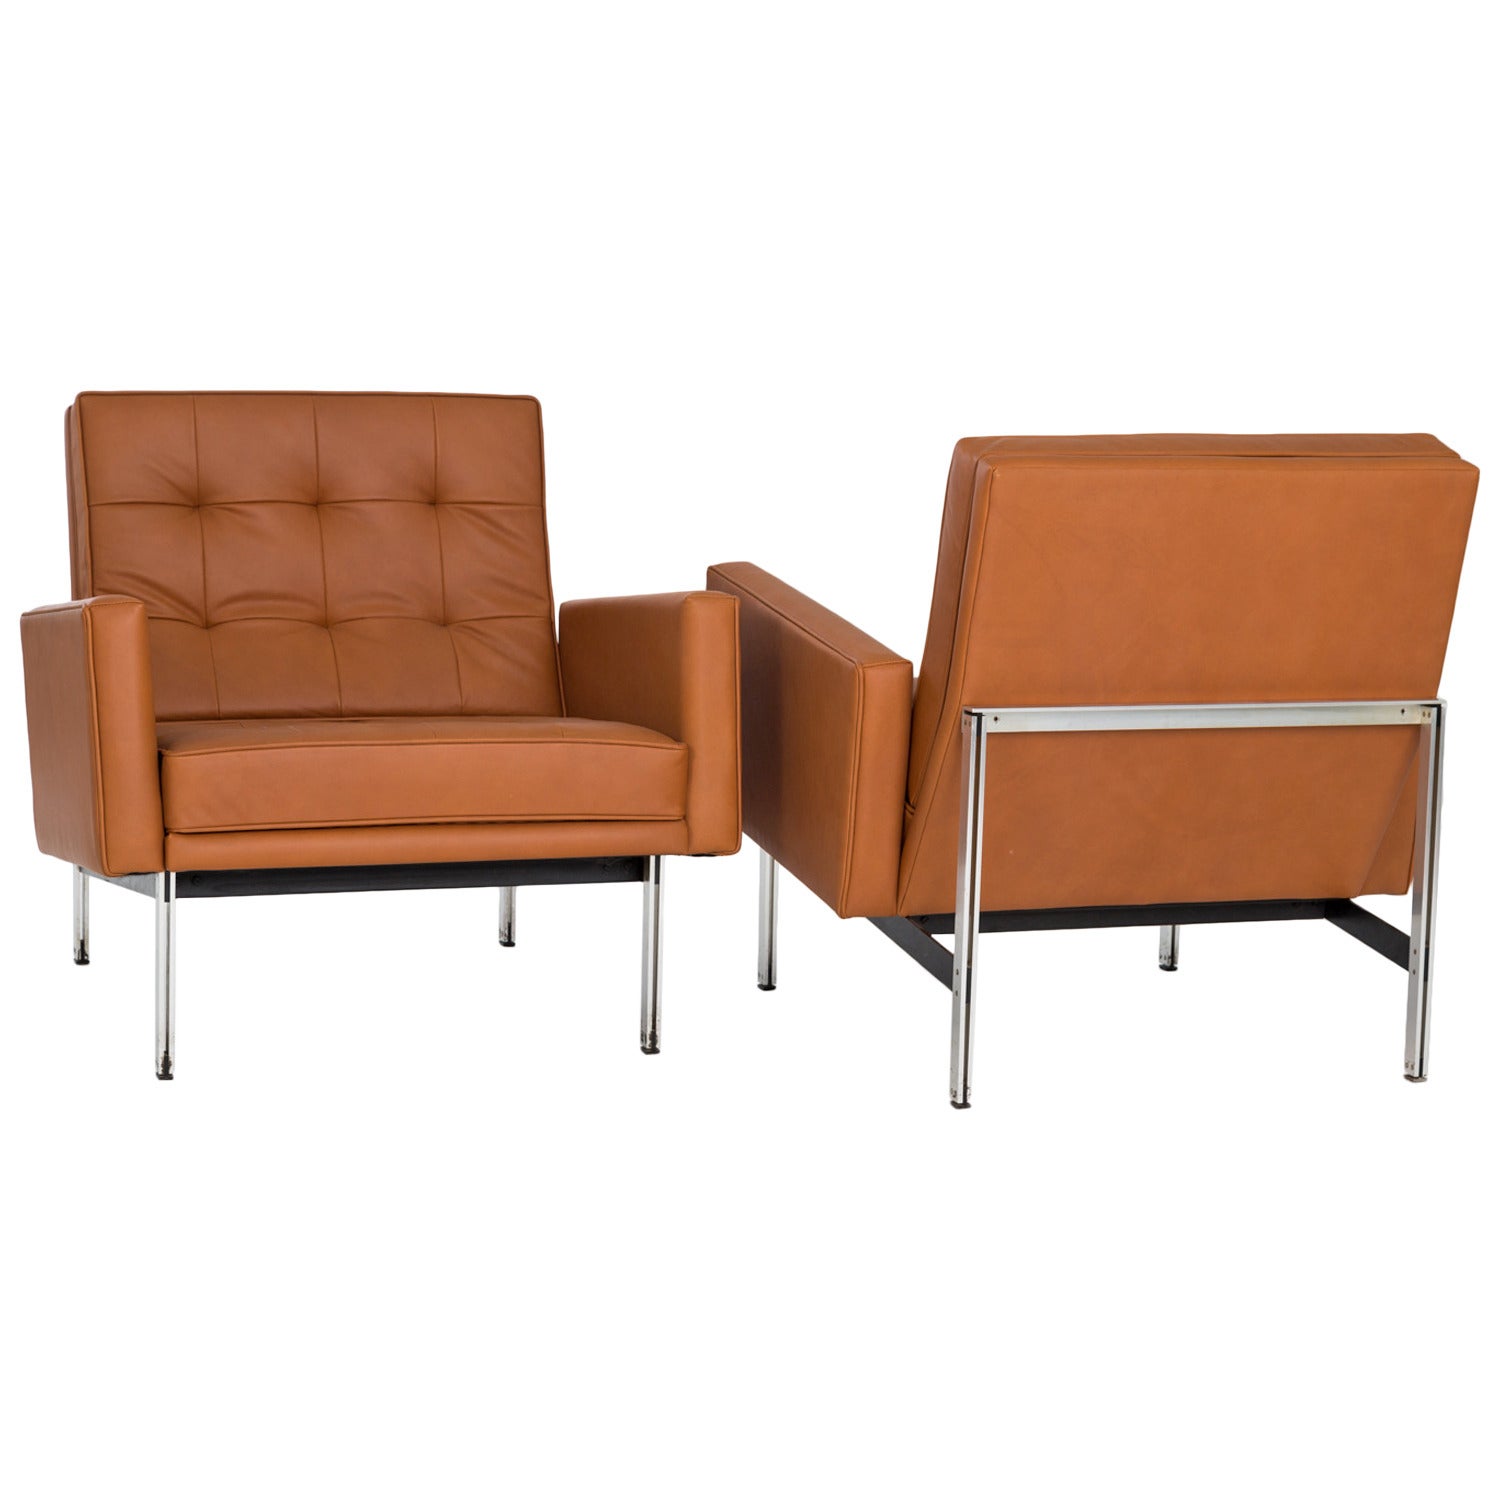 Pair of Florence Knoll Parallel Bar Lounge or Armchairs, 1955